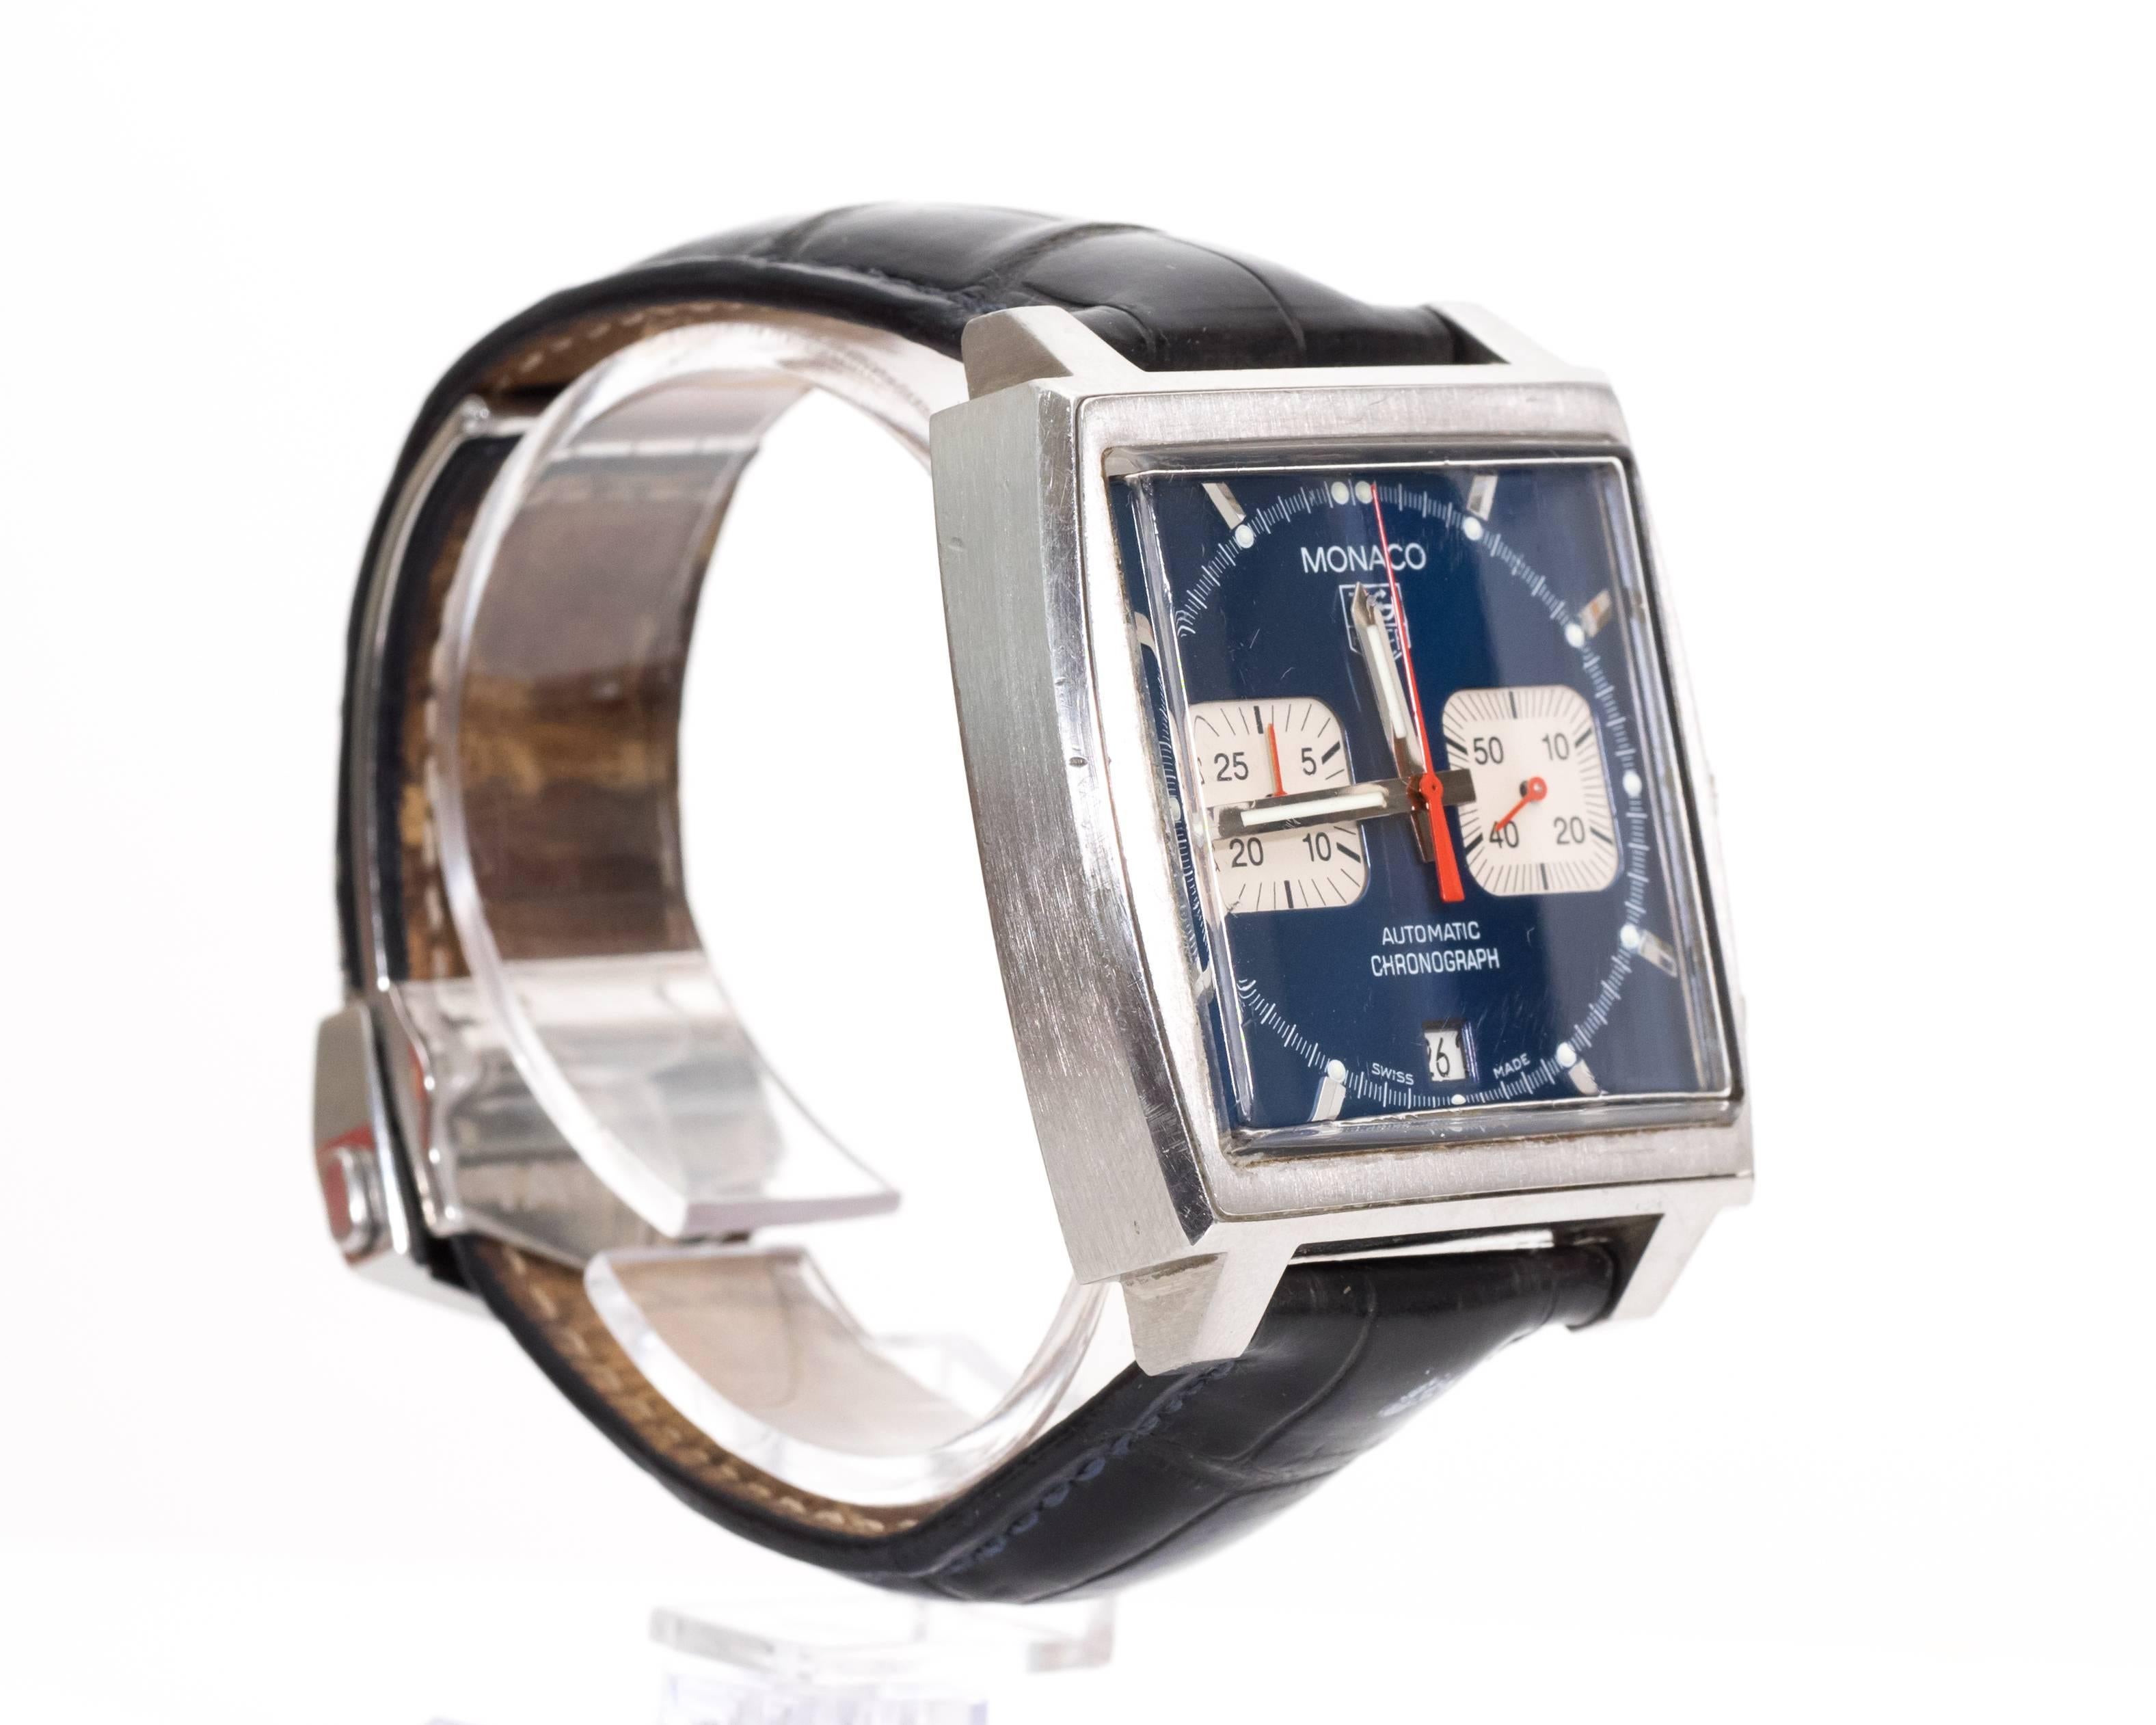 Immortalized by the "King of Cool" Steve McQueen in the 1970 thrilling motorsports film "Le Mans",  the blue-faced, square-dial Heuer Monaco watch became a symbol of the "don't crack under pressure" attitude. This